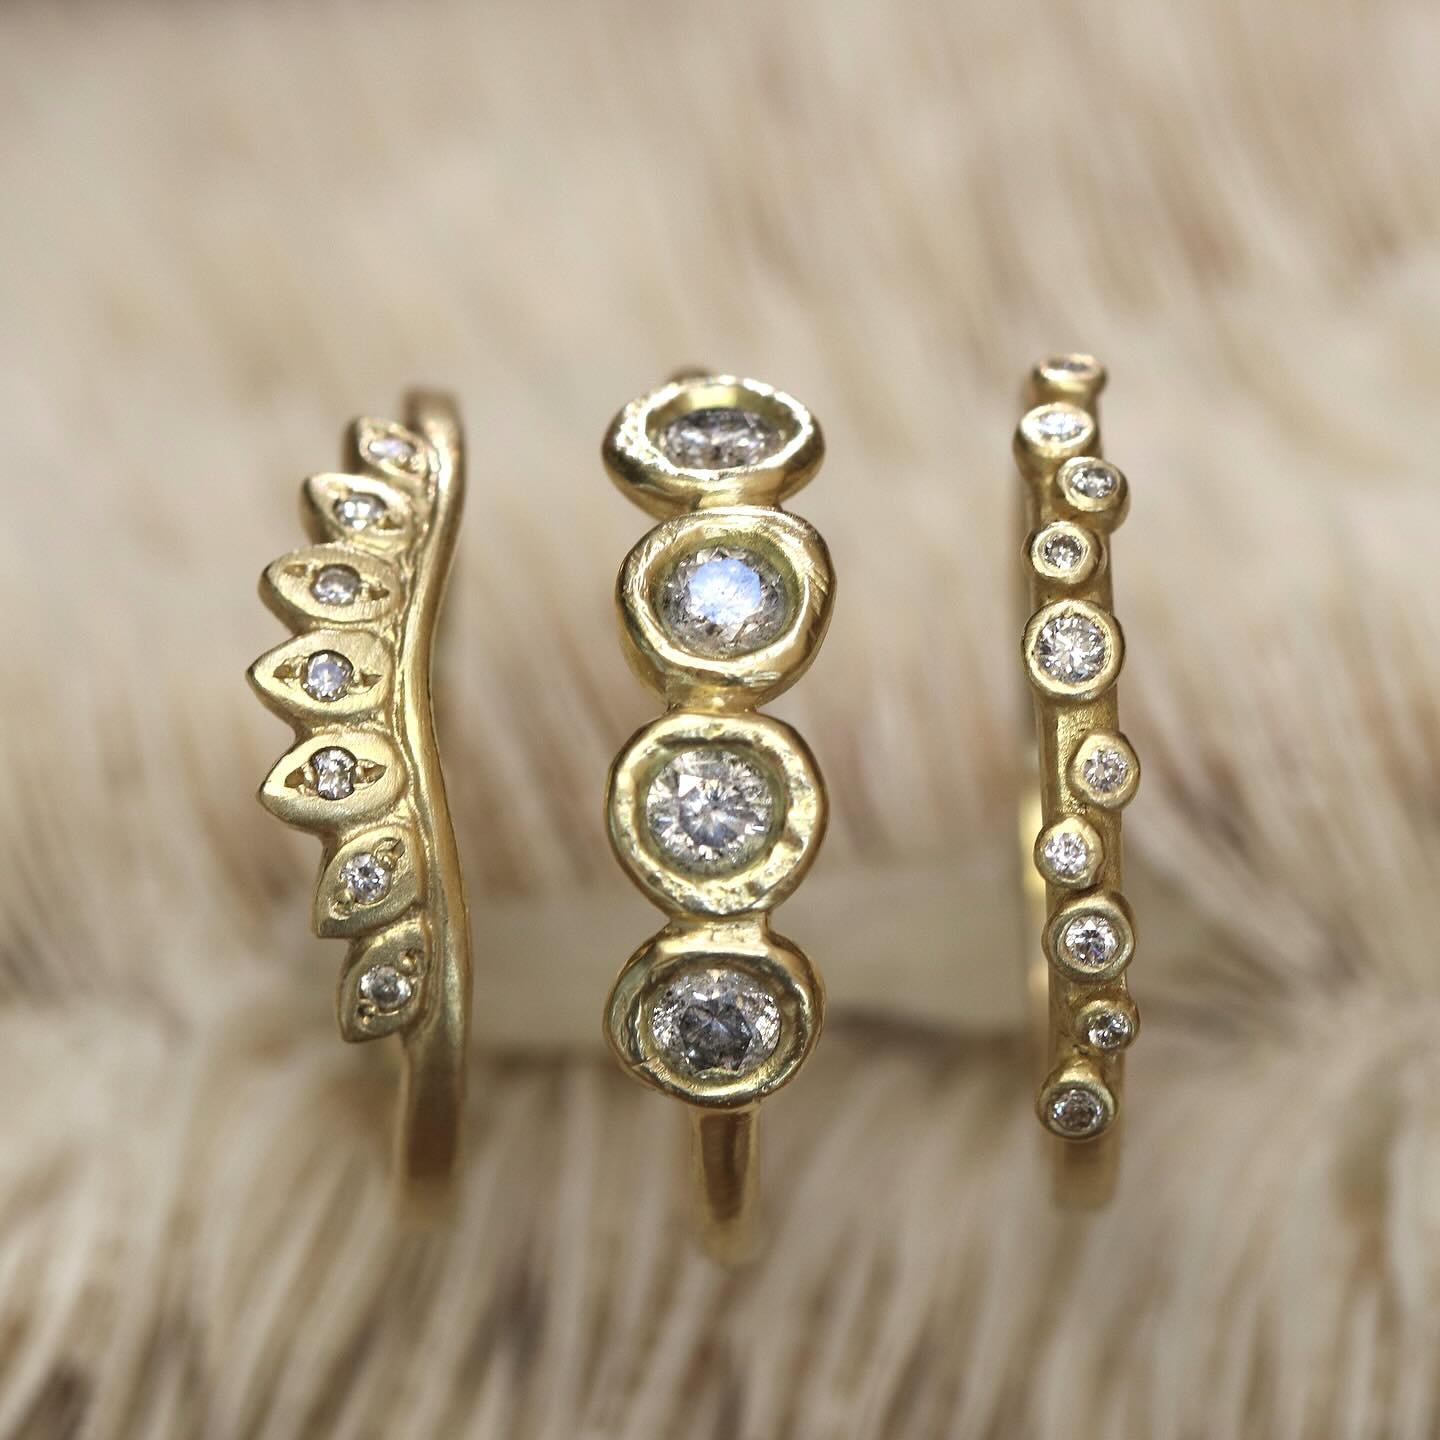 A whimsical trio of bands in warm recycled gold with a mix of white and gray diamonds. Perfect to add to your stack or complete a bridal set. ✨

Left to right:
Laurel diamond band
Erosion line gray diamond band
Galaxy diamond band

#stackingbands #ha